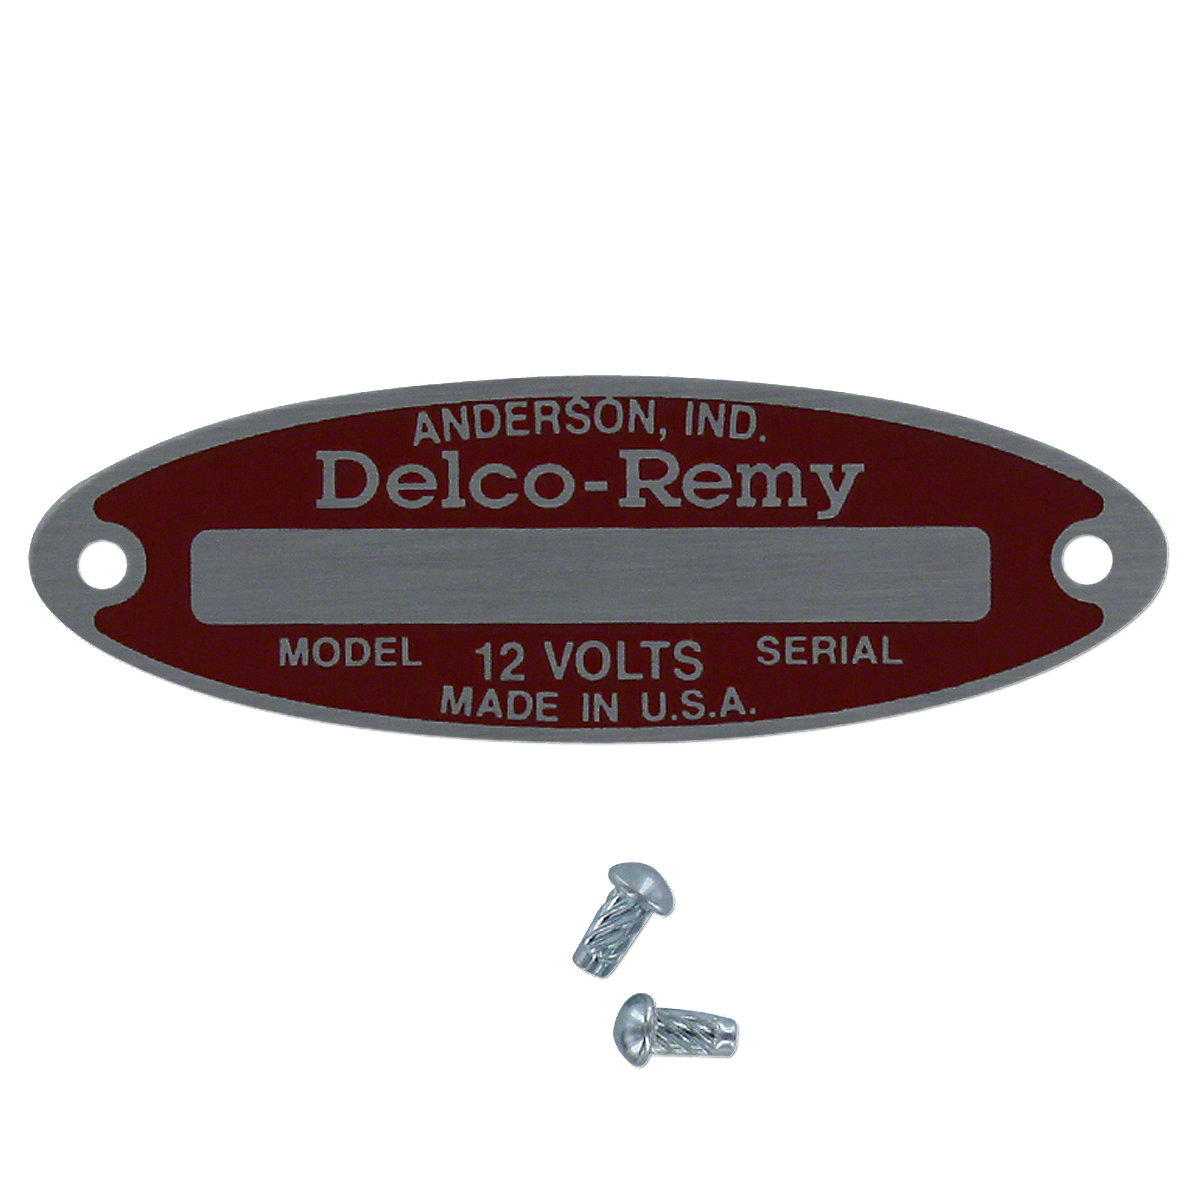 12 Volt Delco Remy Blank Starter Tag For Massey Ferguson And Massey Harris.